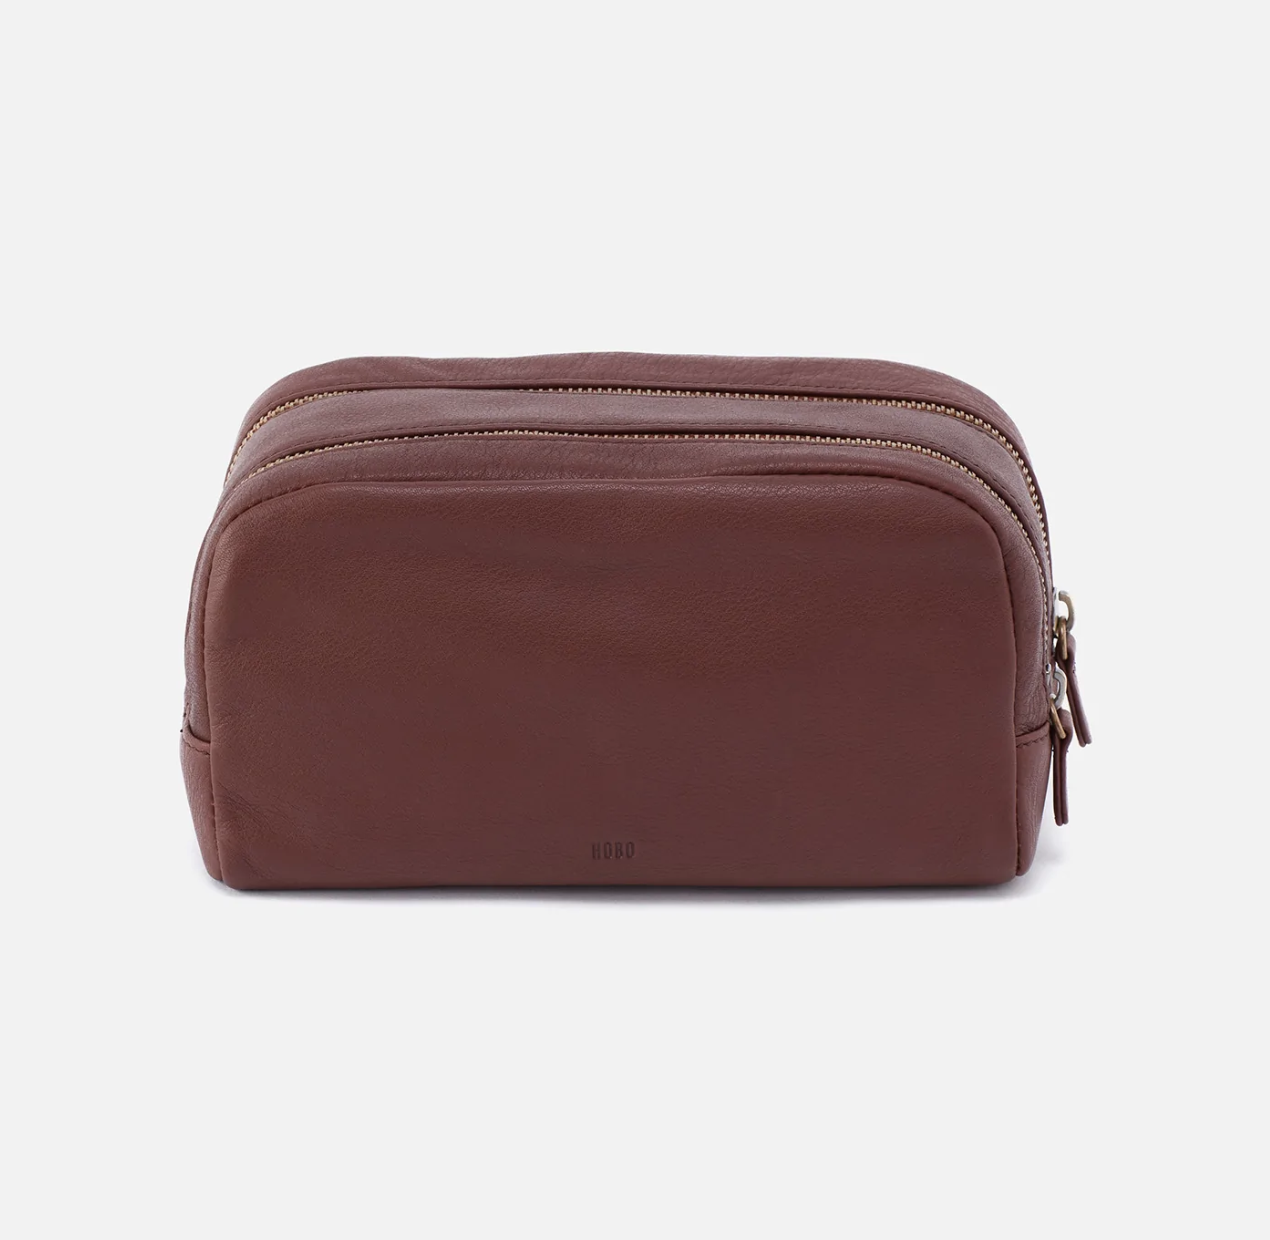 The Leather Men's Travel Kit in black has a two zipper compartments and a lined interior perfect for keeping your toiletries organized. For sale at the Painted Cottage in Edgewater, MD